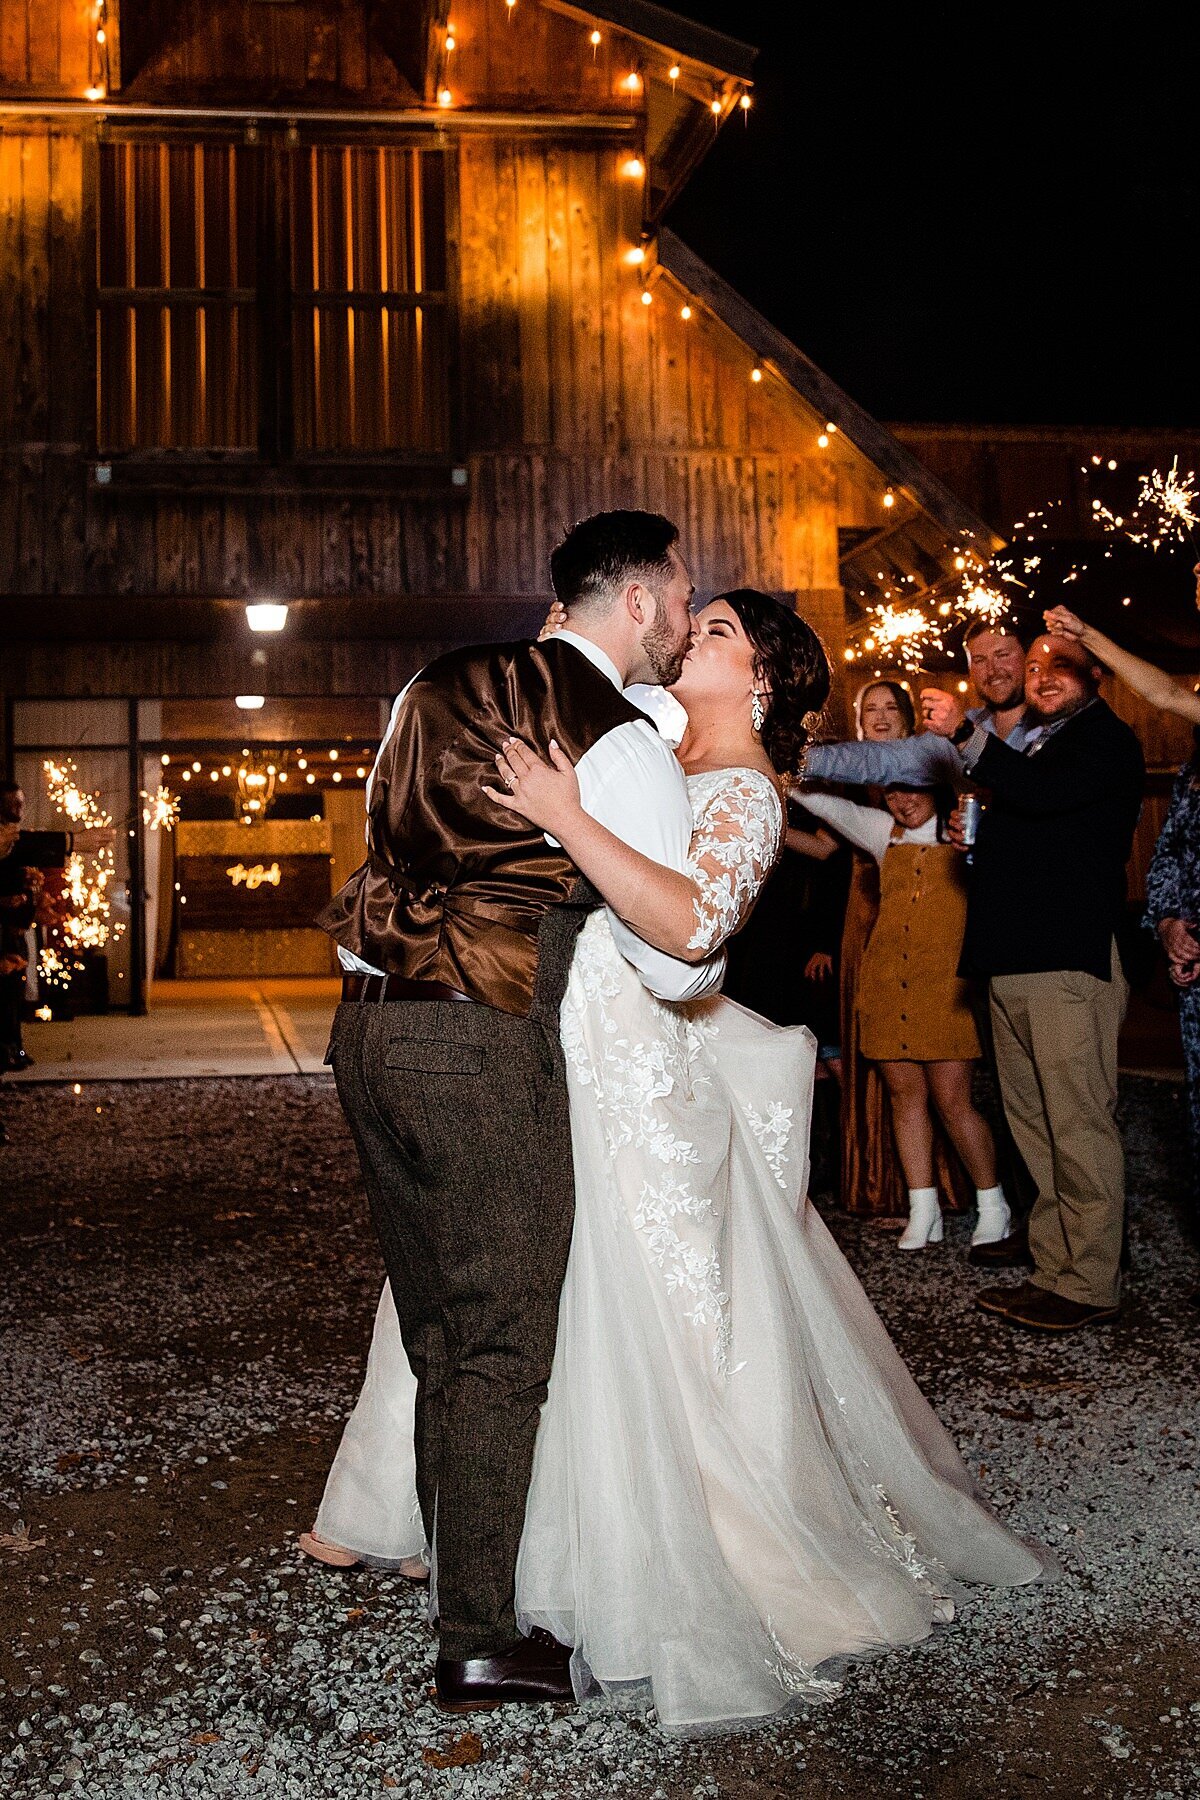 Bride and groom kissing during grand sparkler exit outside of Copper Ridge barn event center at night